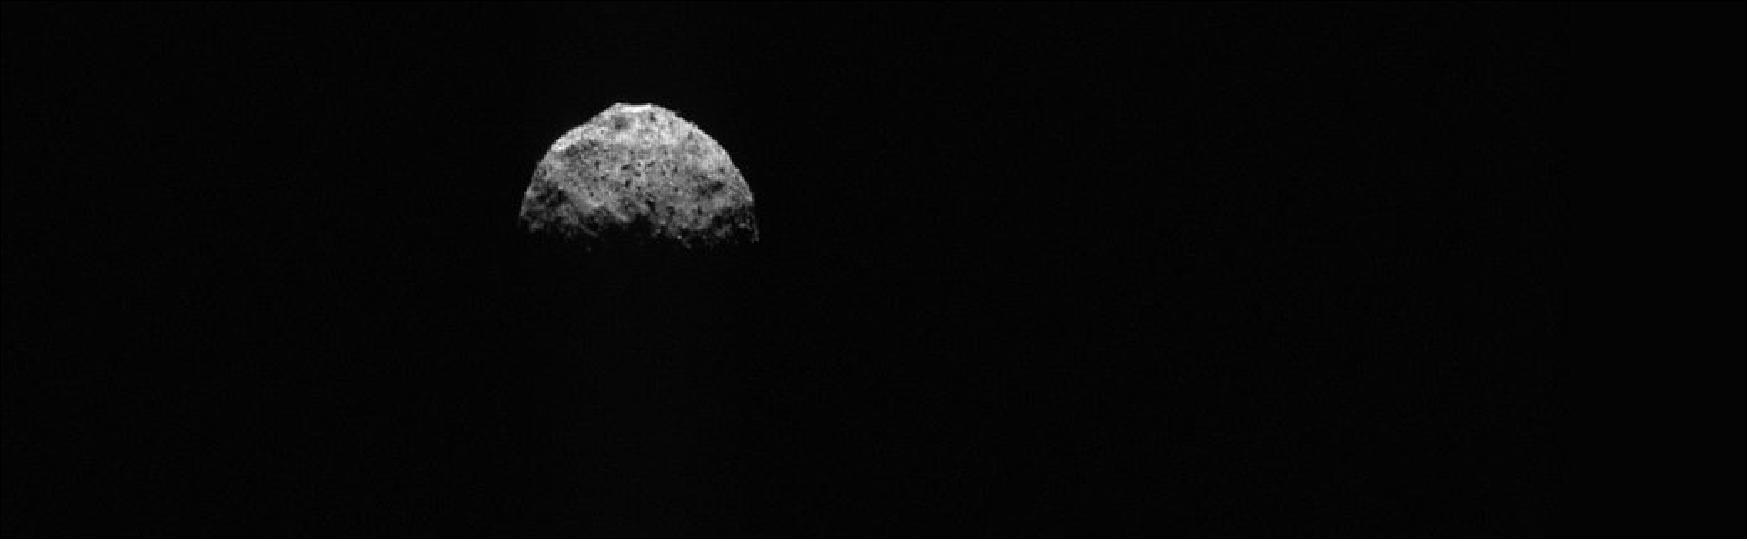 Figure 17: This image shows a top-down view of asteroid Bennu, with a portion of the asteroid’s equatorial ridge and northern hemisphere illuminated. It was taken by the PolyCam camera on NASA’s OSIRIS-REx spacecraft on March 4, 2021, from a distance of about 186 miles (300 km). The spacecraft’s cameras are pointed directly at Bennu’s north pole. Two large equatorial craters are visible on the asteroid’s edge (center and center left). The image was obtained during the mission’s Post-TAG Operations phase, as the spacecraft slowly approached Bennu in preparation for a final observational flyby on April 7 (image credit: NASA/Goddard/University of Arizona)